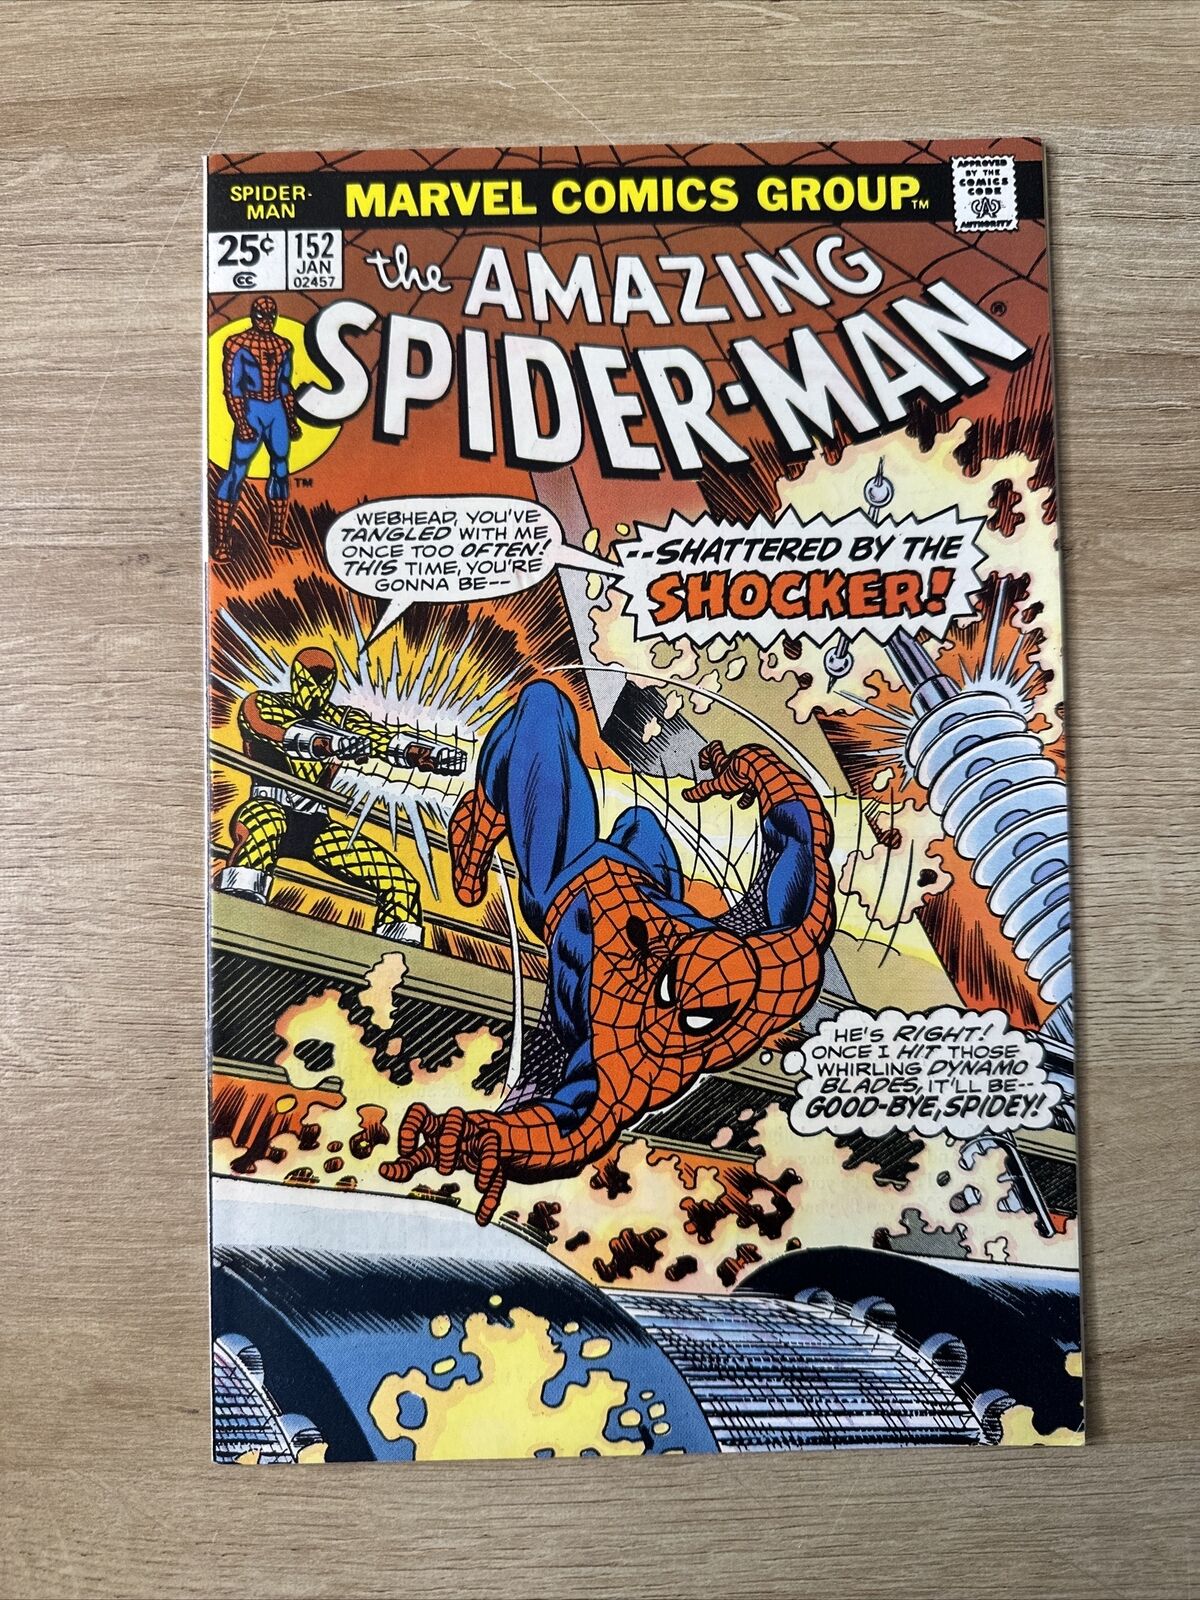 The Amazing Spiderman #152, Shattered by the Shocker Part 2, 1/1976 HIGH GRADE